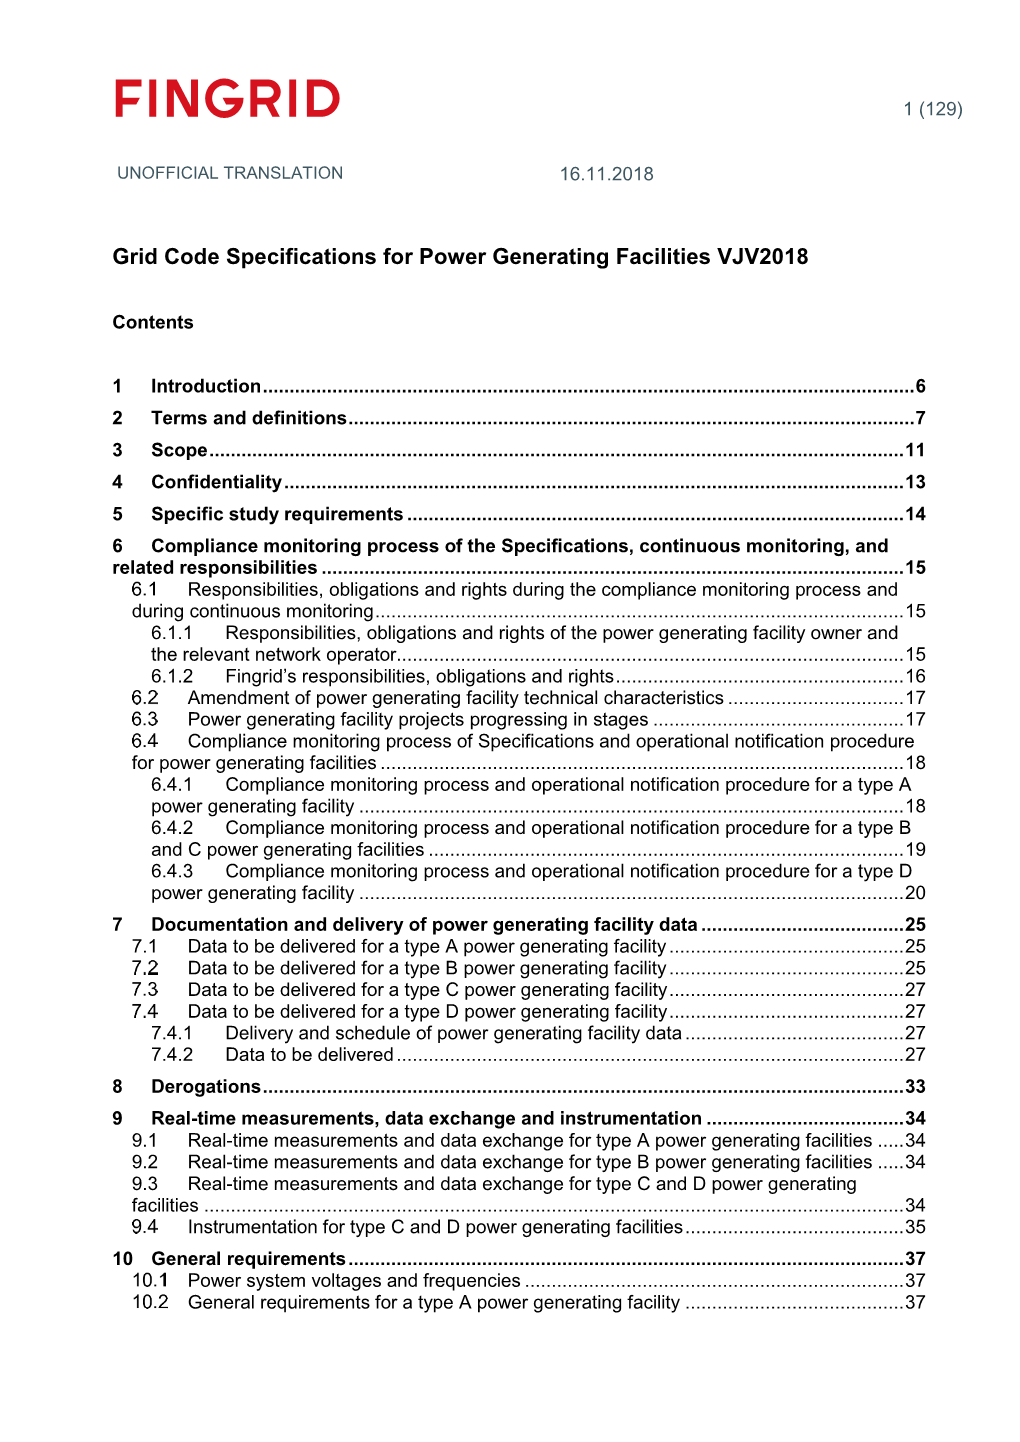 Grid Code Specifications for Power Generating Facilities VJV2018